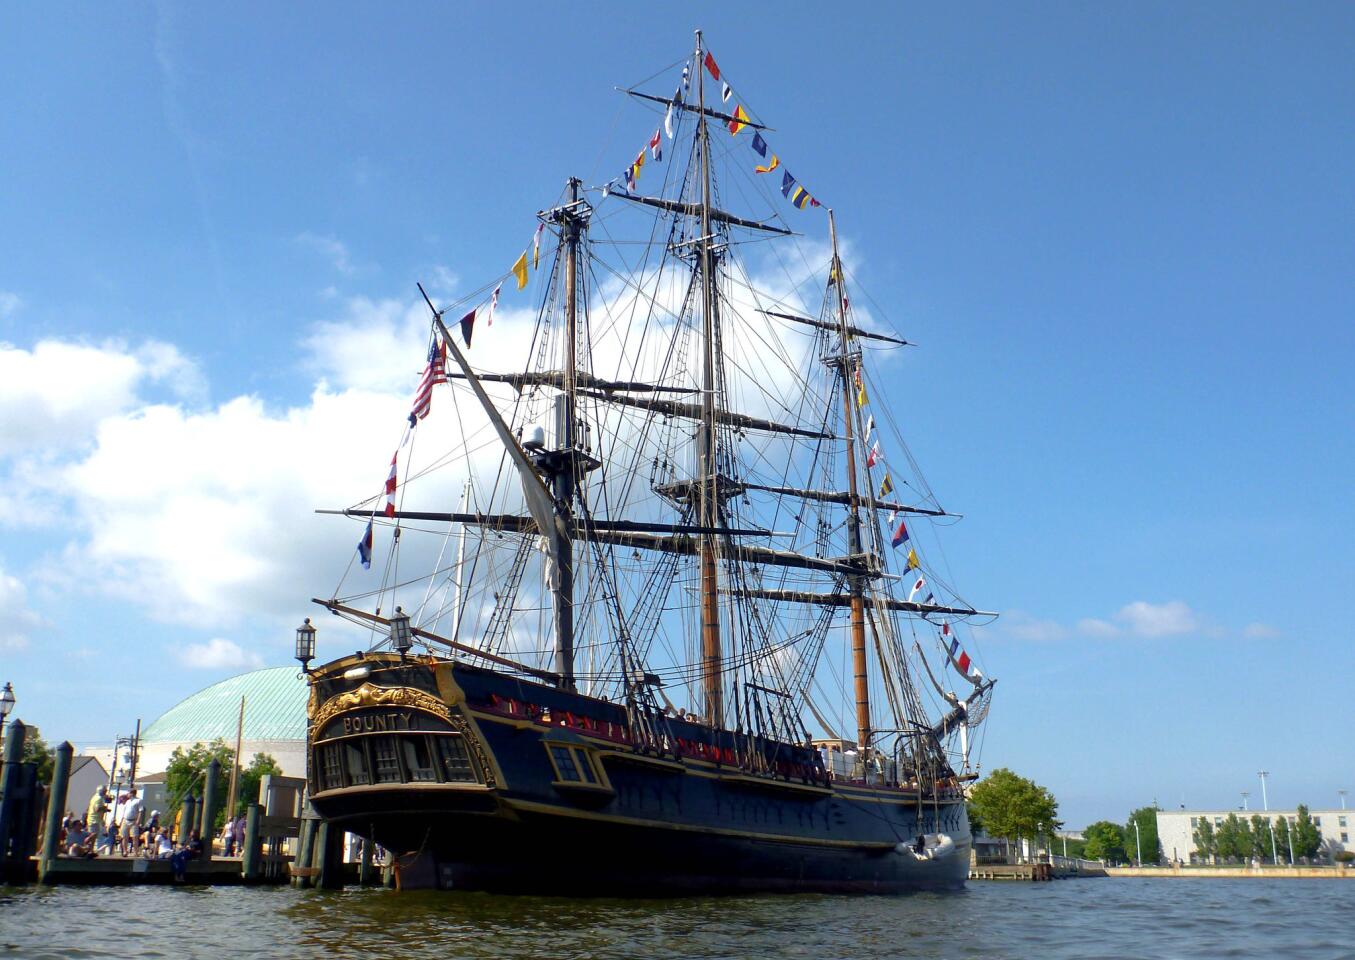 The tall ship Bounty, a replica of an 18th century sailing ship, is moored beside the U.S. Naval Academy in Annapolis, Md.